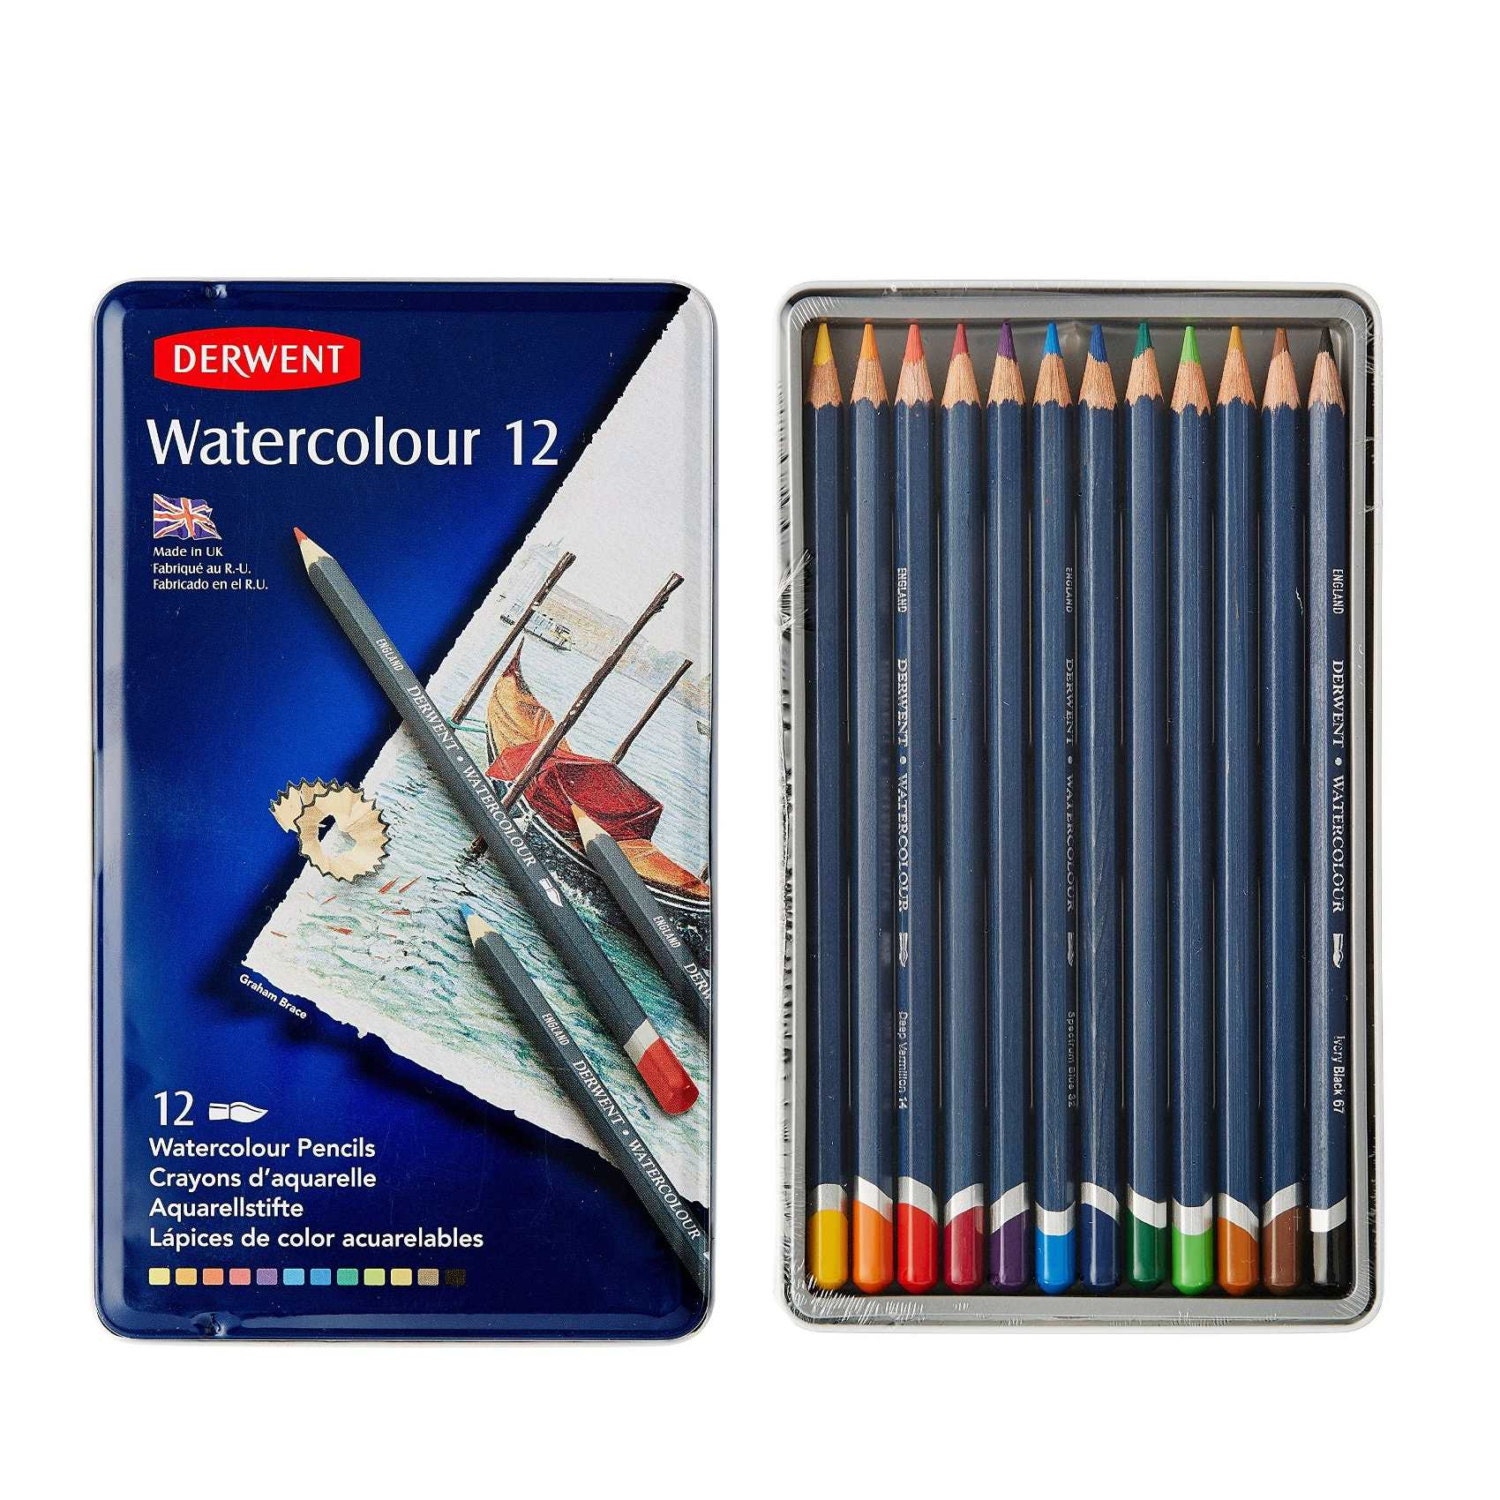 MARKART 48 Colored Pencils Set for Adult Coloring Book, Sketch, Shading, Blending Crafting, Soft Cores, Professional Art Coloring Drawing Pencils for